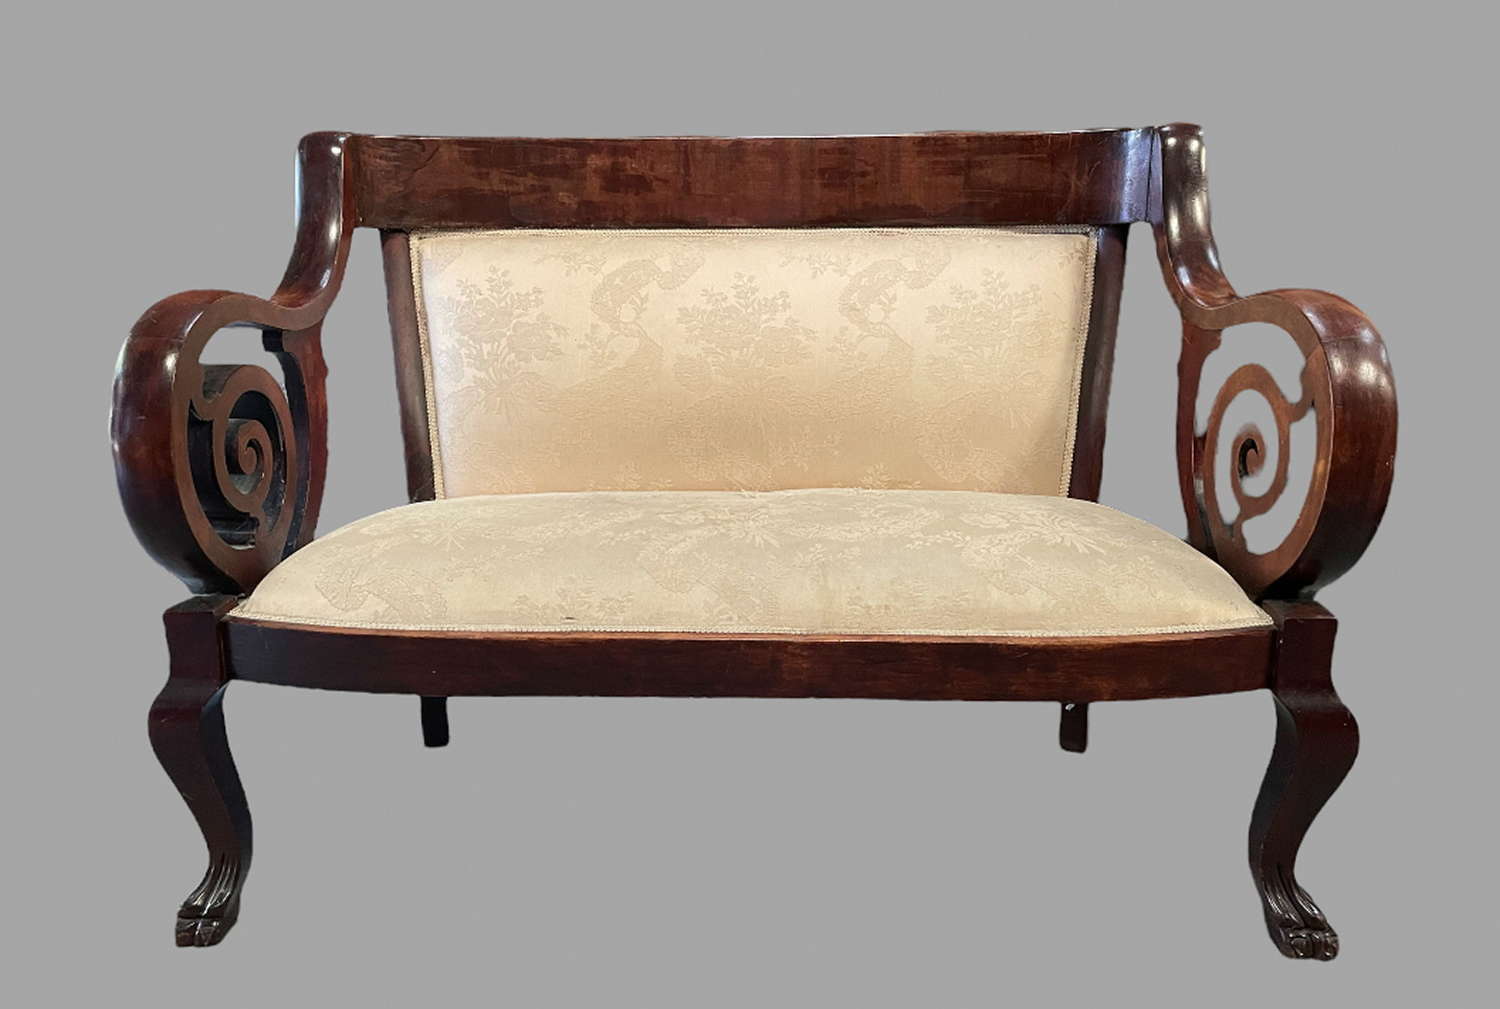 A French Empire Settee